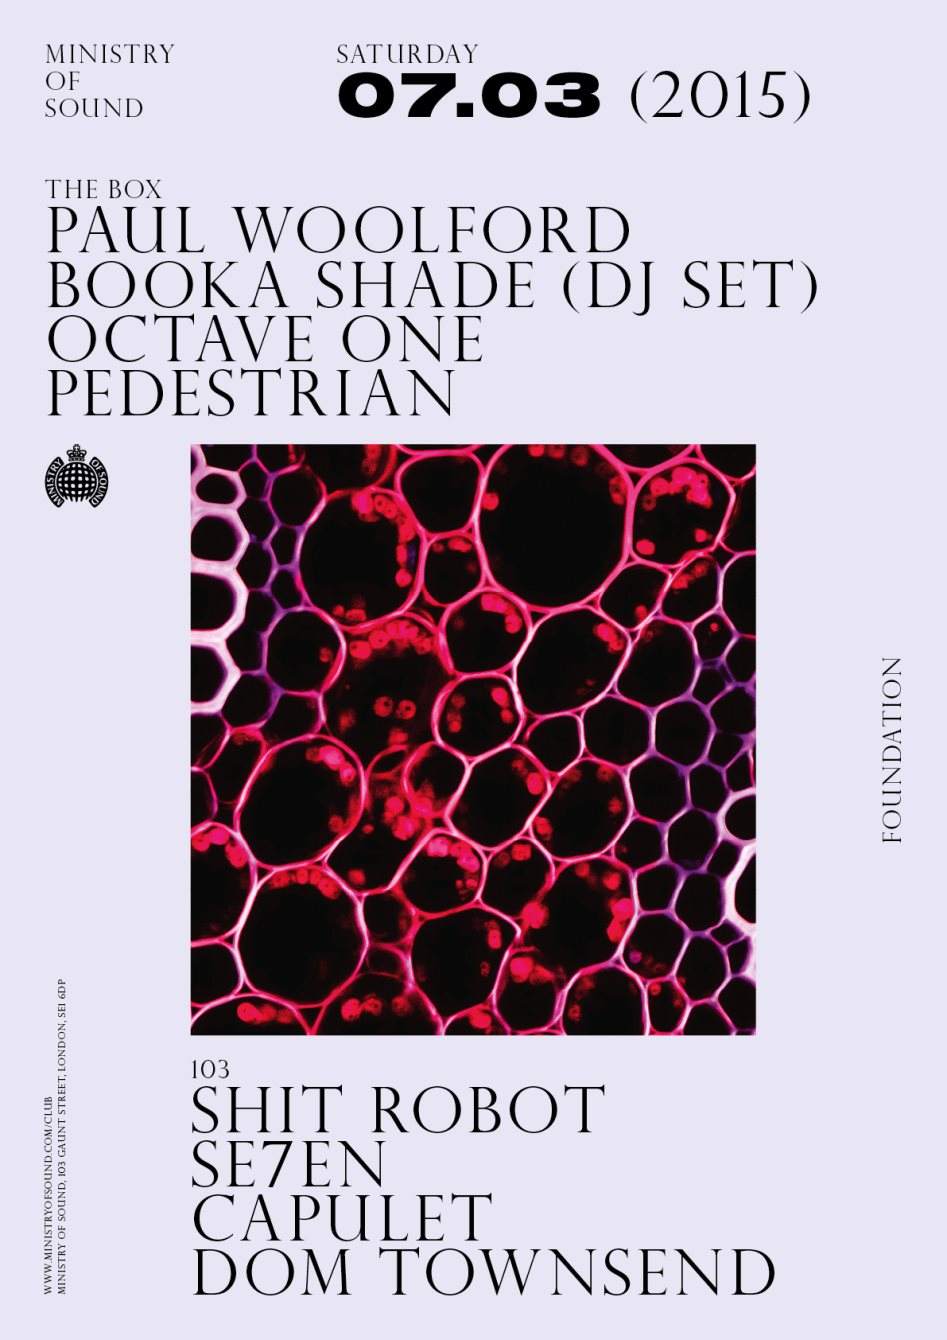 Paul Woolford + Booka Shade + Octave One + Pedestrian + Shit Robot - フライヤー表